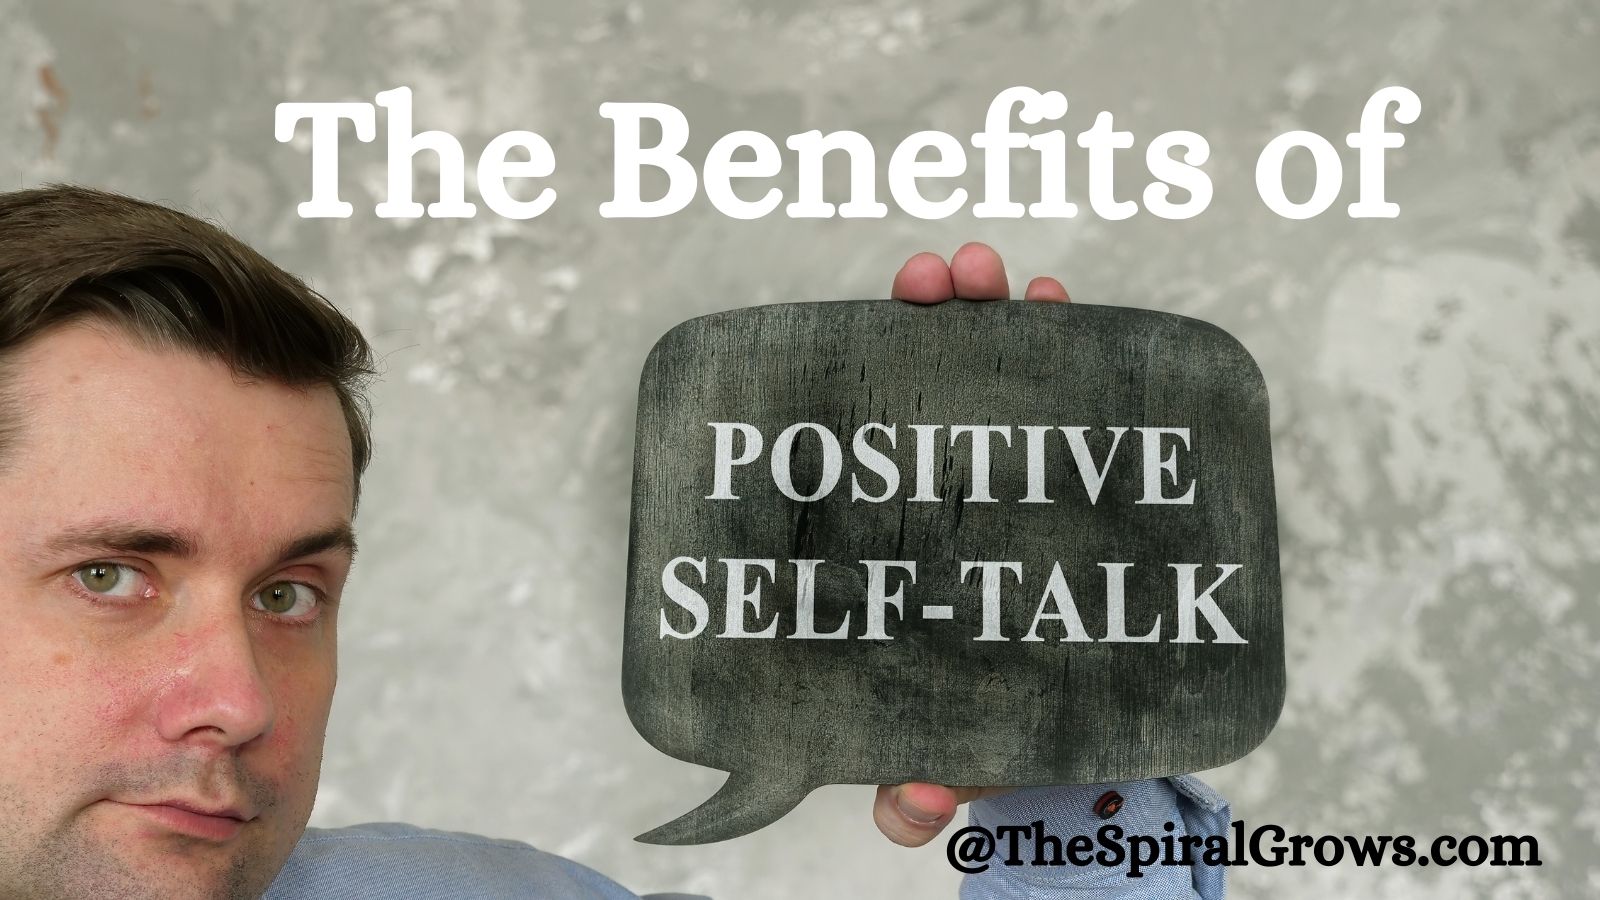 The benefits of positive self talk